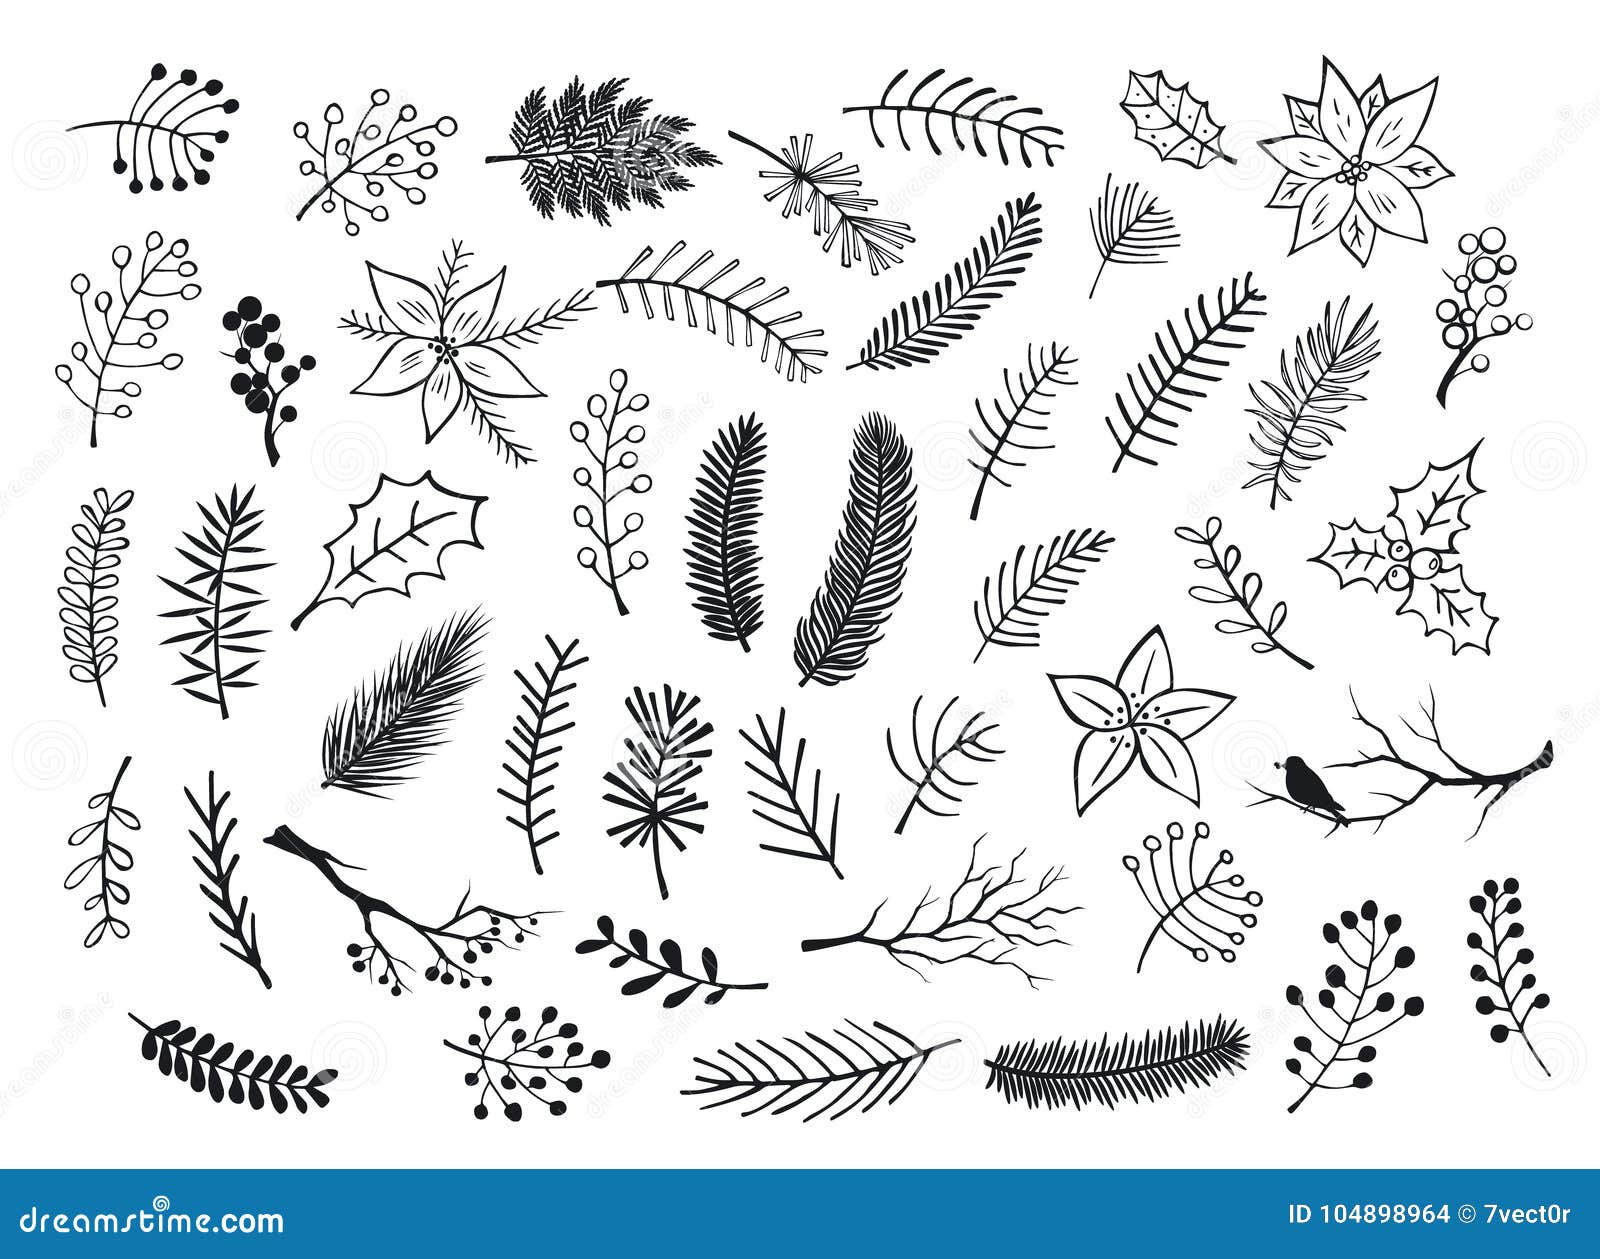 collection of hand drawn outlined and silhouettes winter foliage, branches twigs, flowers in black